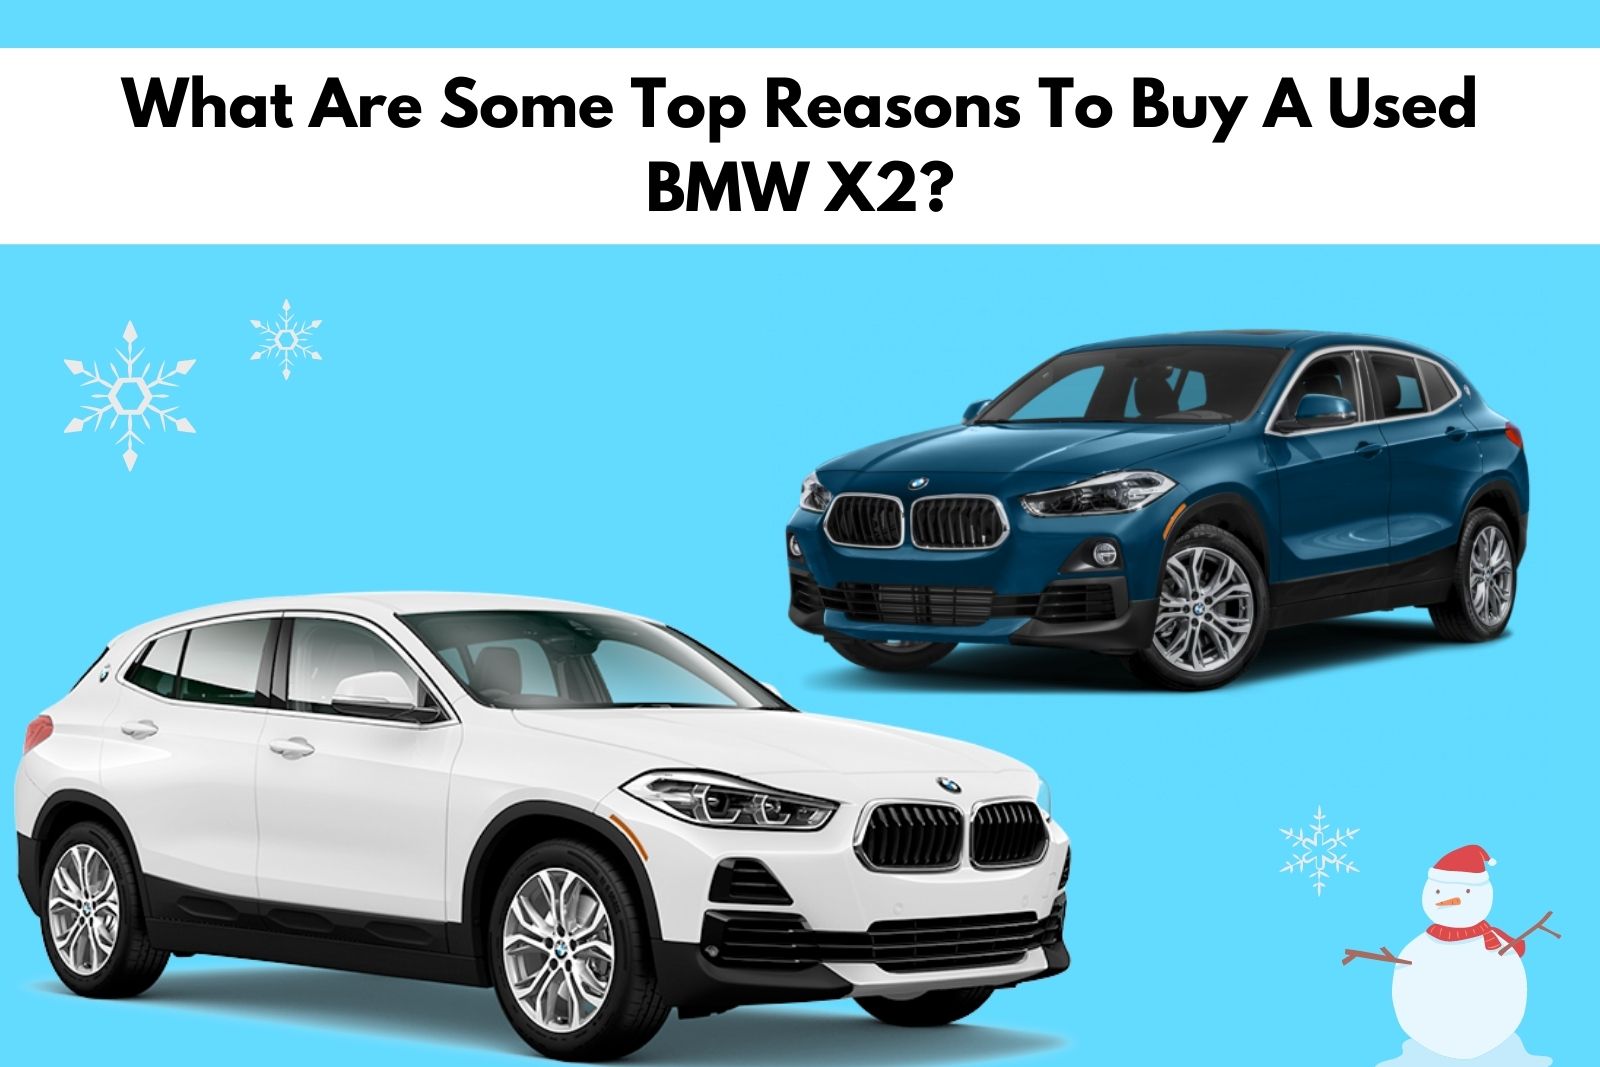 What Are Some Top Reasons To Buy A Used BMW X2?